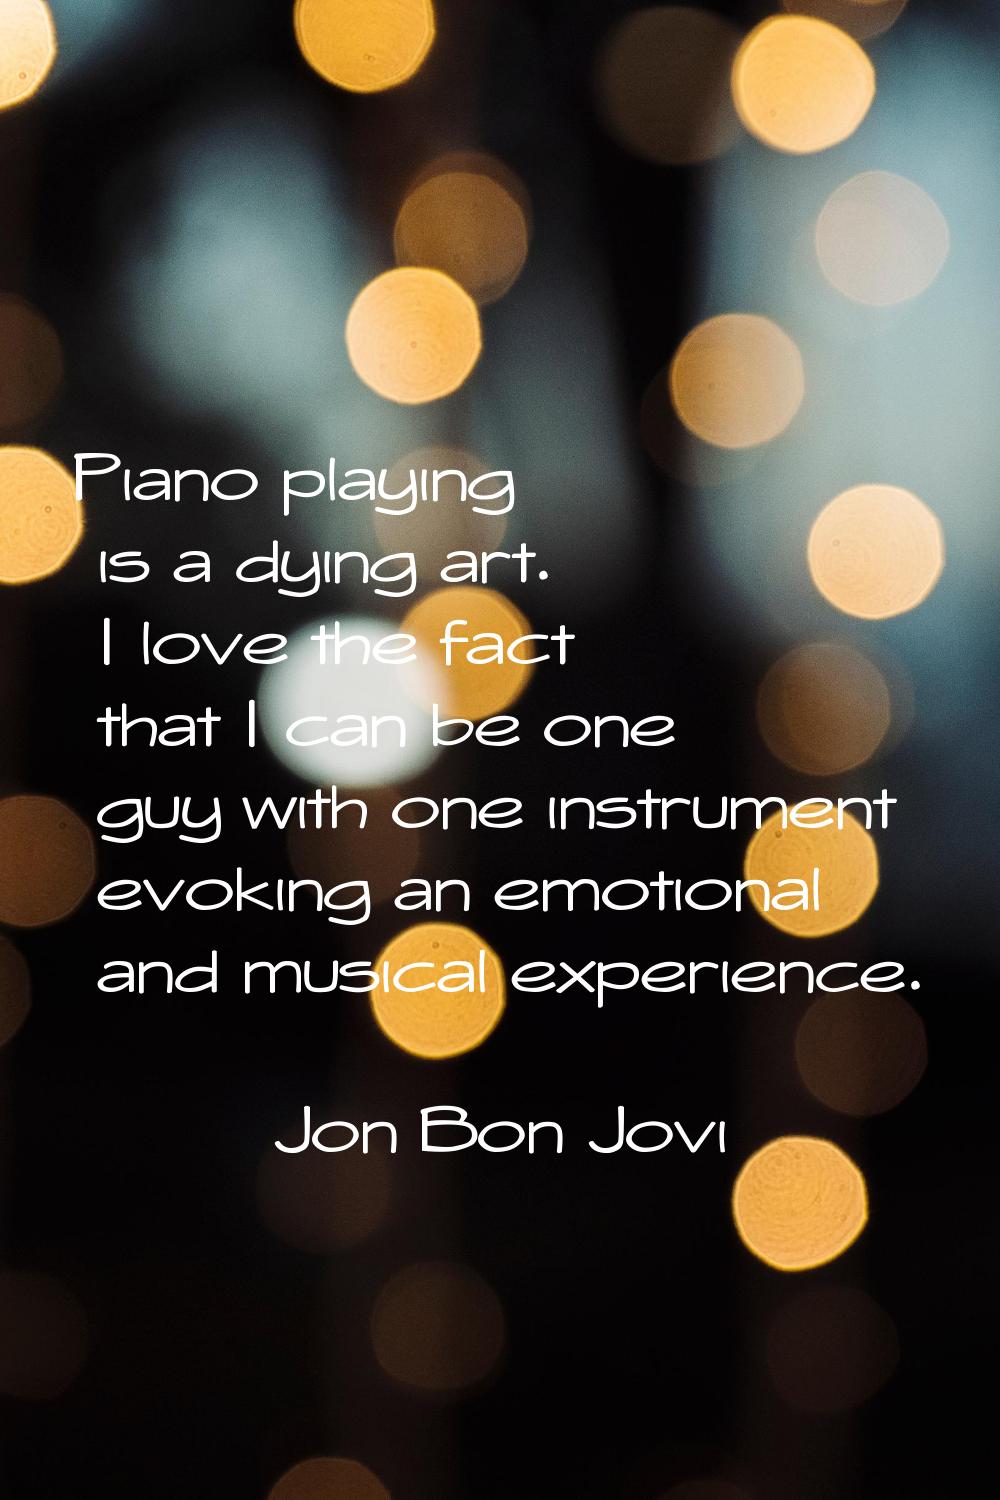 Piano playing is a dying art. I love the fact that I can be one guy with one instrument evoking an 